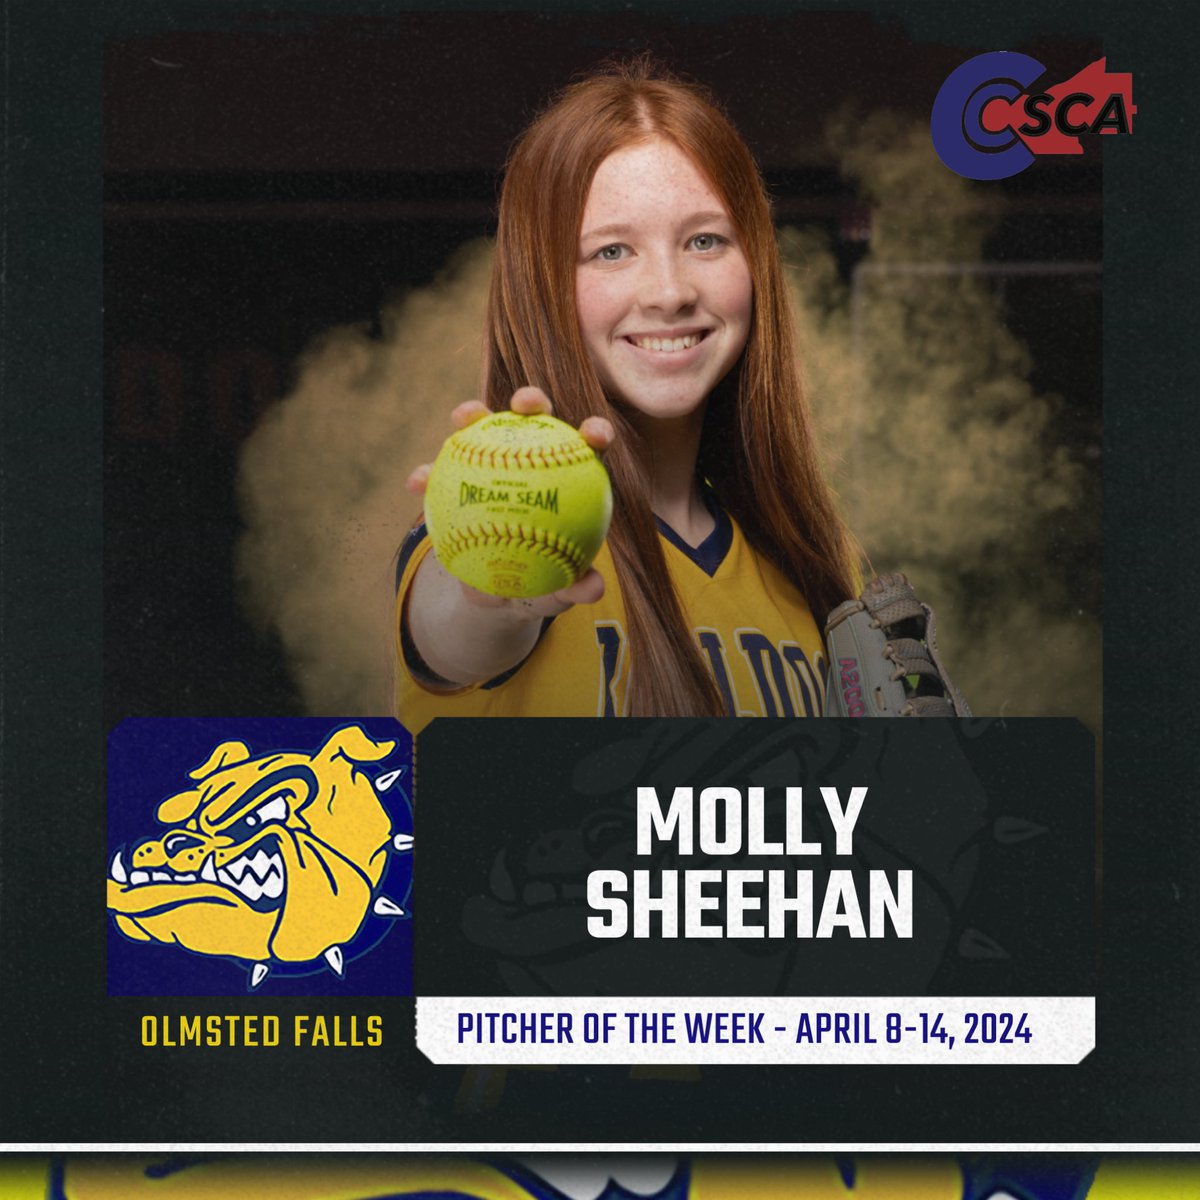 ⭐️ Olmsted Falls with the Week 3 Player & Pitcher of the week sweep! 🧹 🧹 Congrats to Jordan & Molly! Olmsted Falls off to a hot start! 🔥